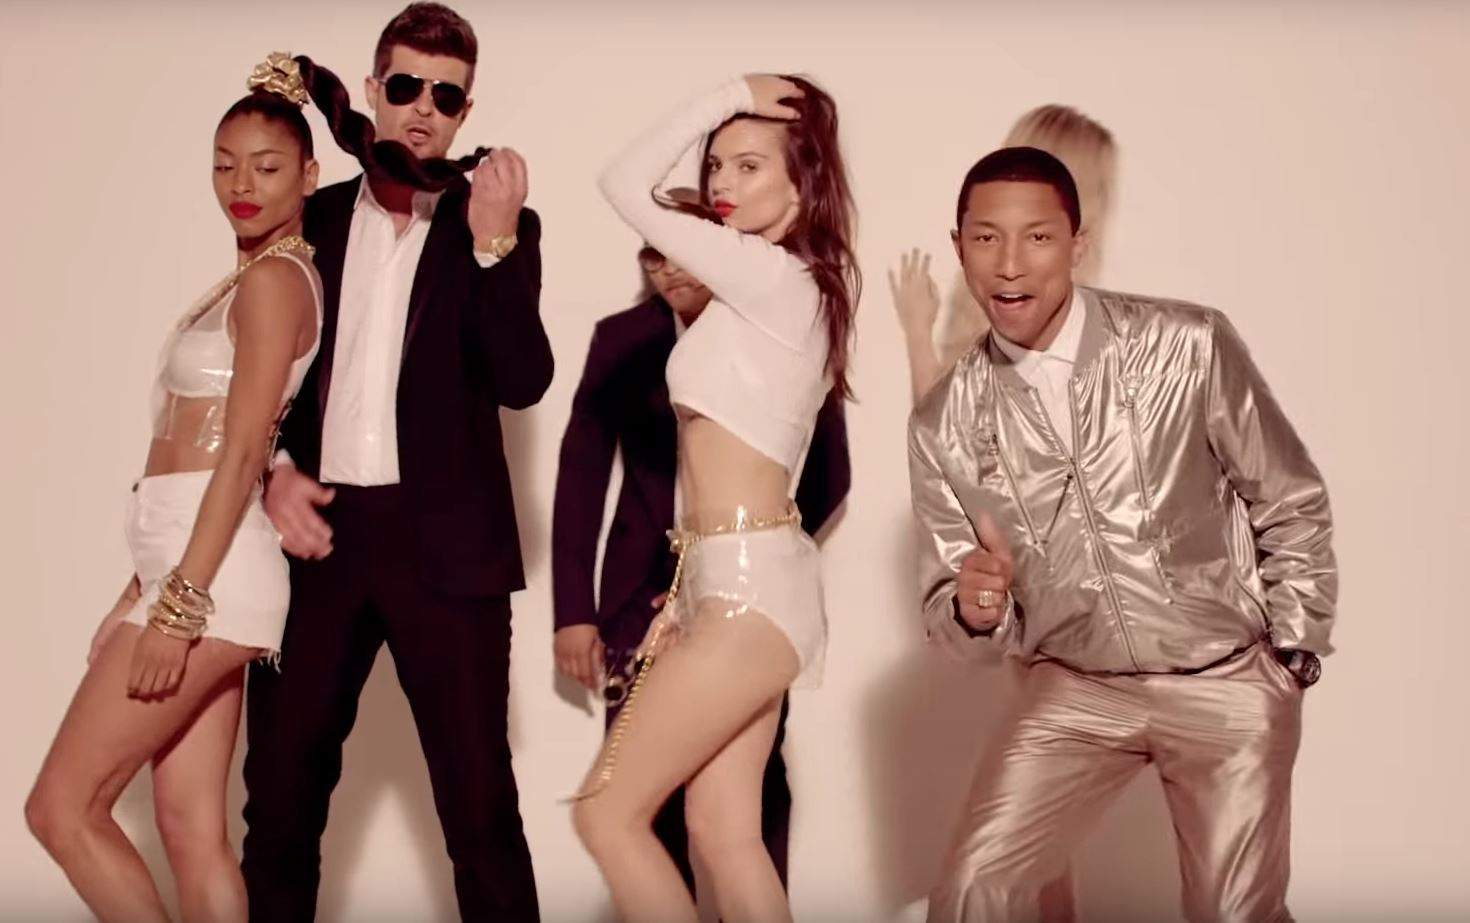 Robin Thicke Blurred Lines Uncut